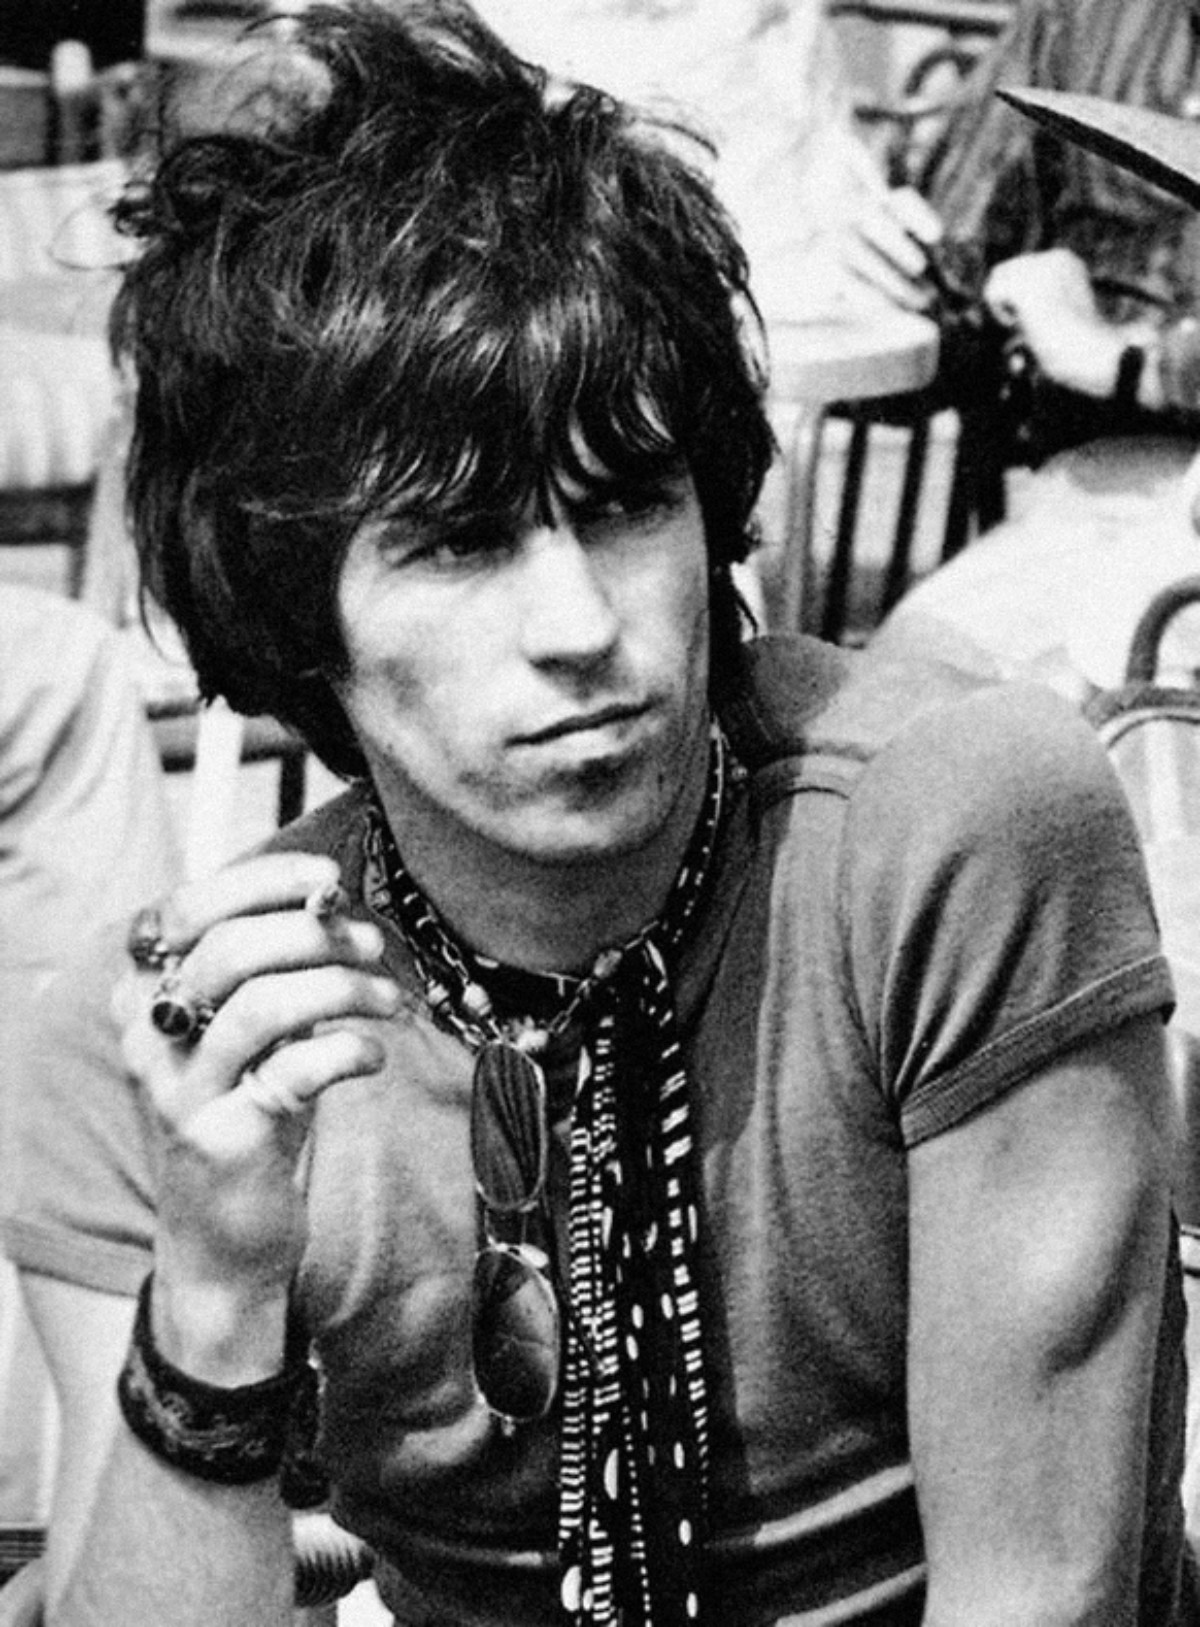 A young Keith Richards ...